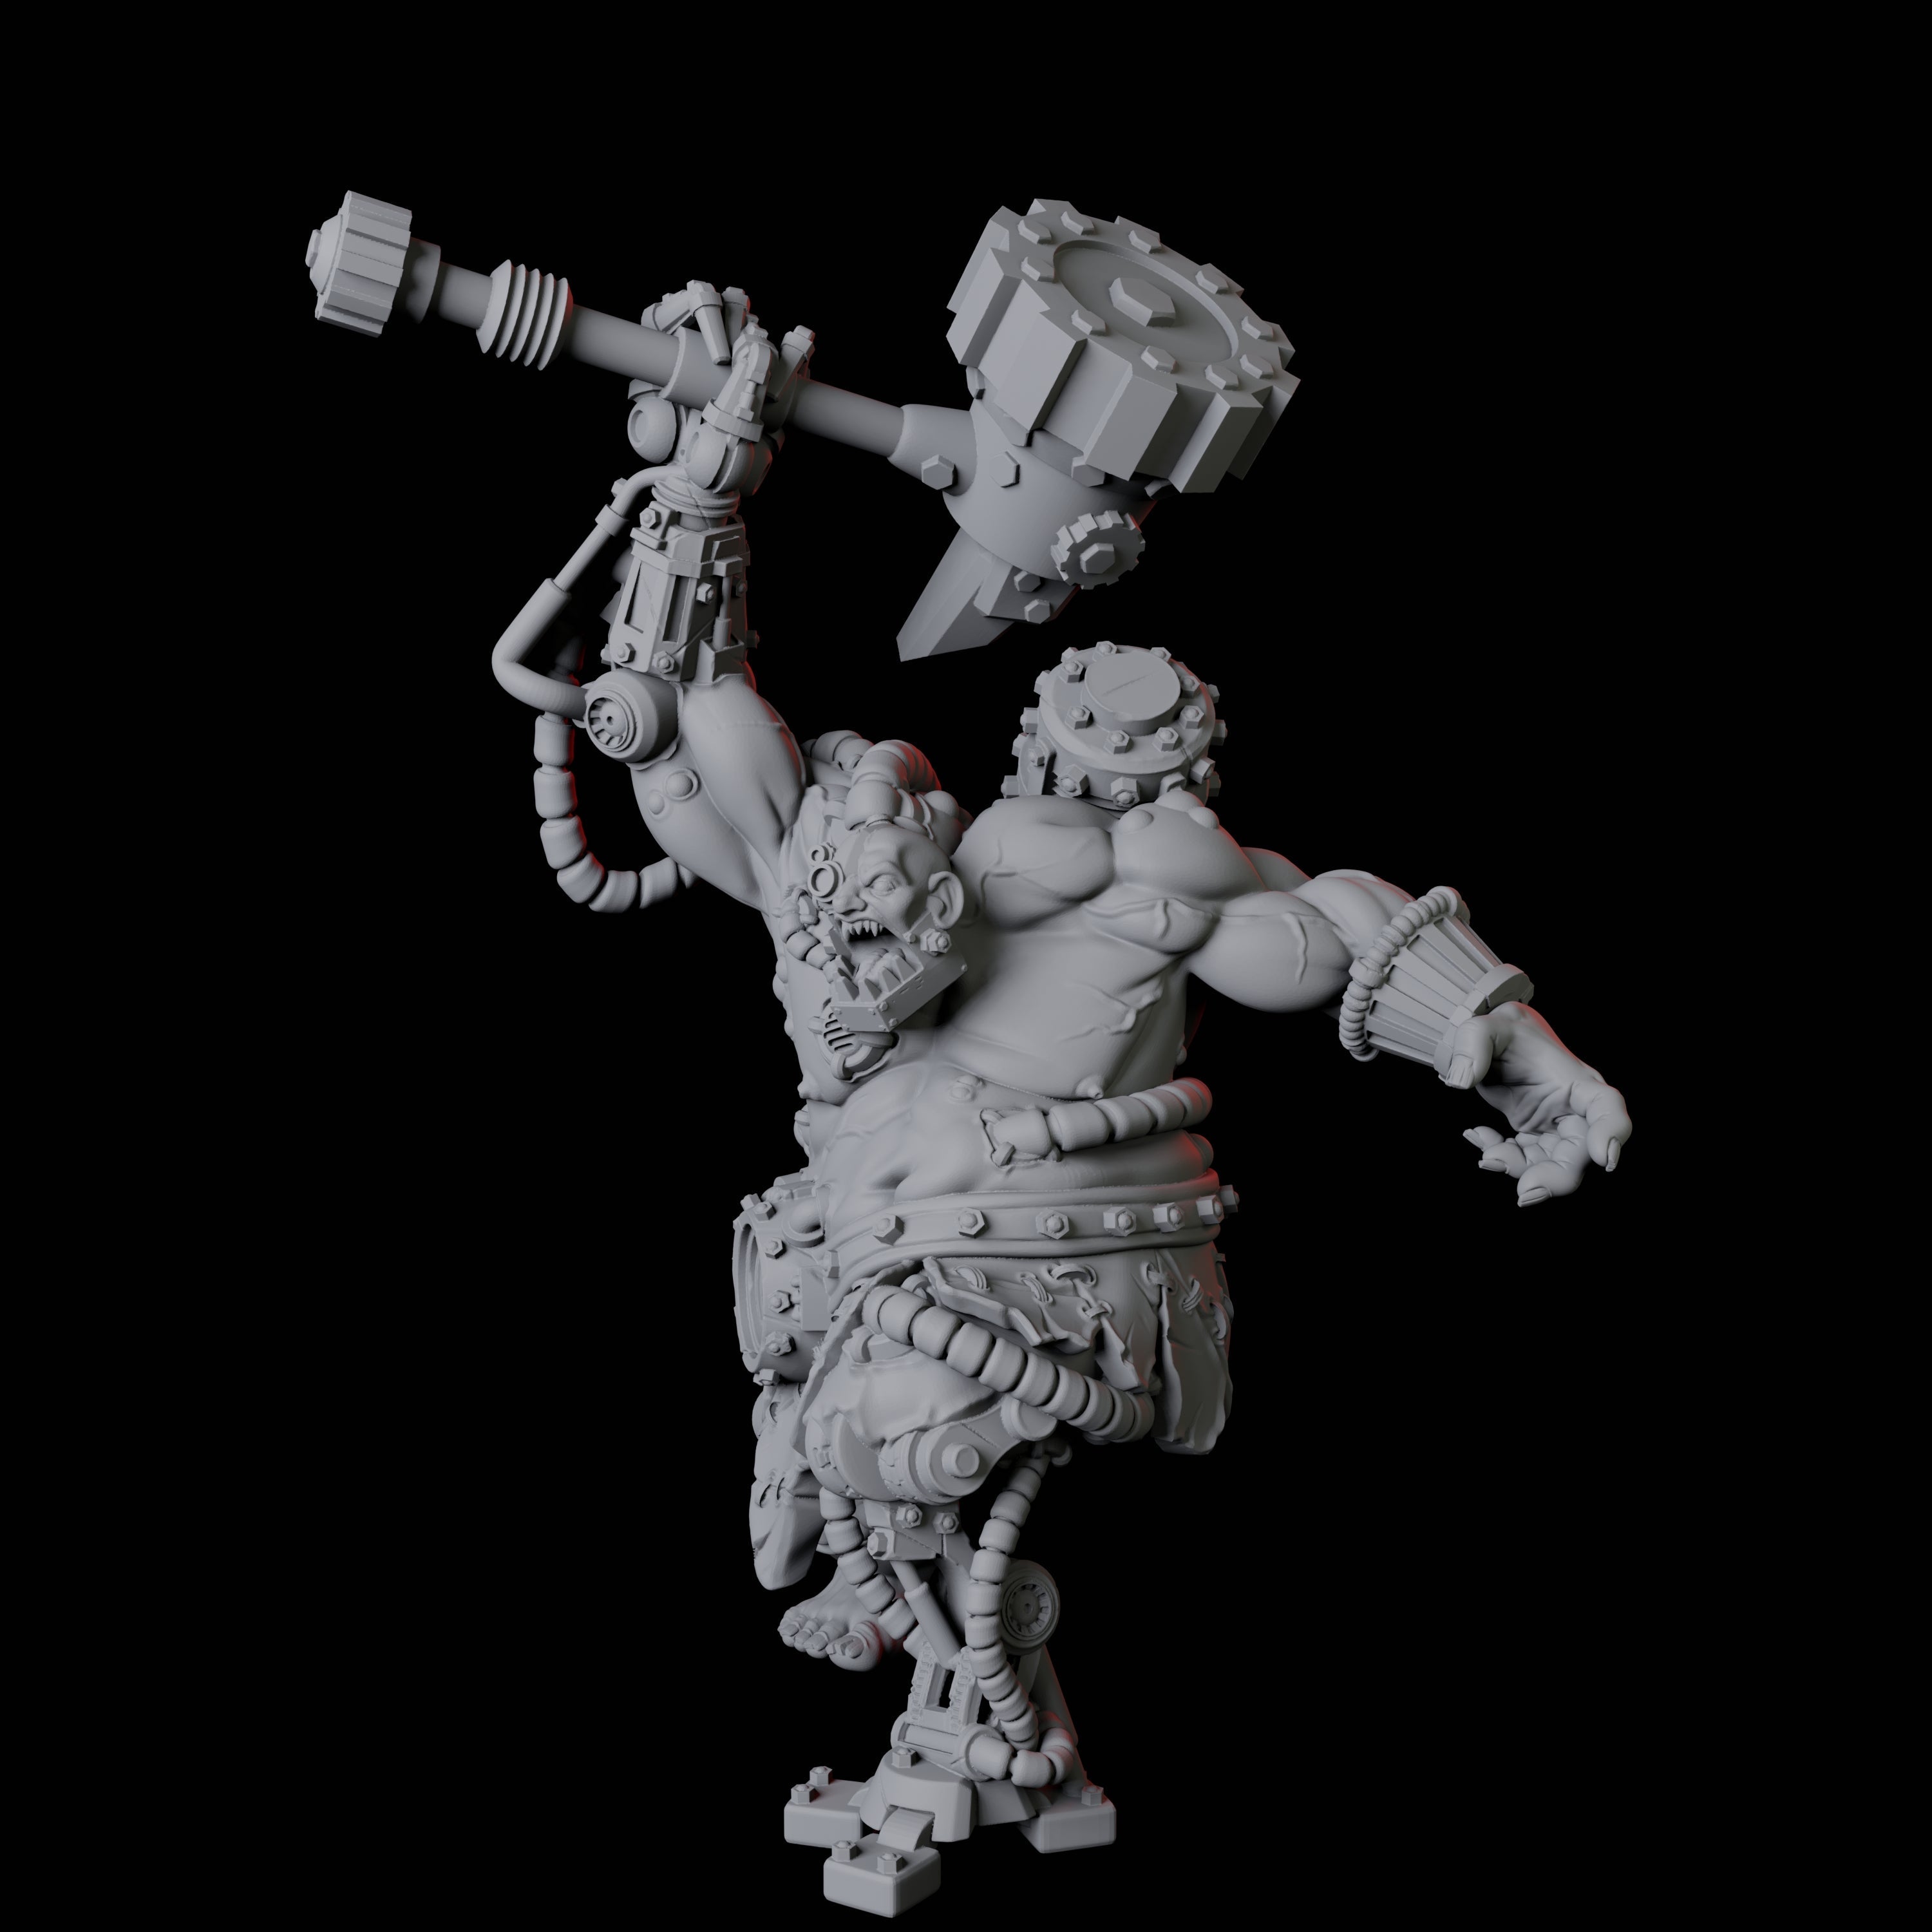 Cyborg Abomination Miniature for Dungeons and Dragons